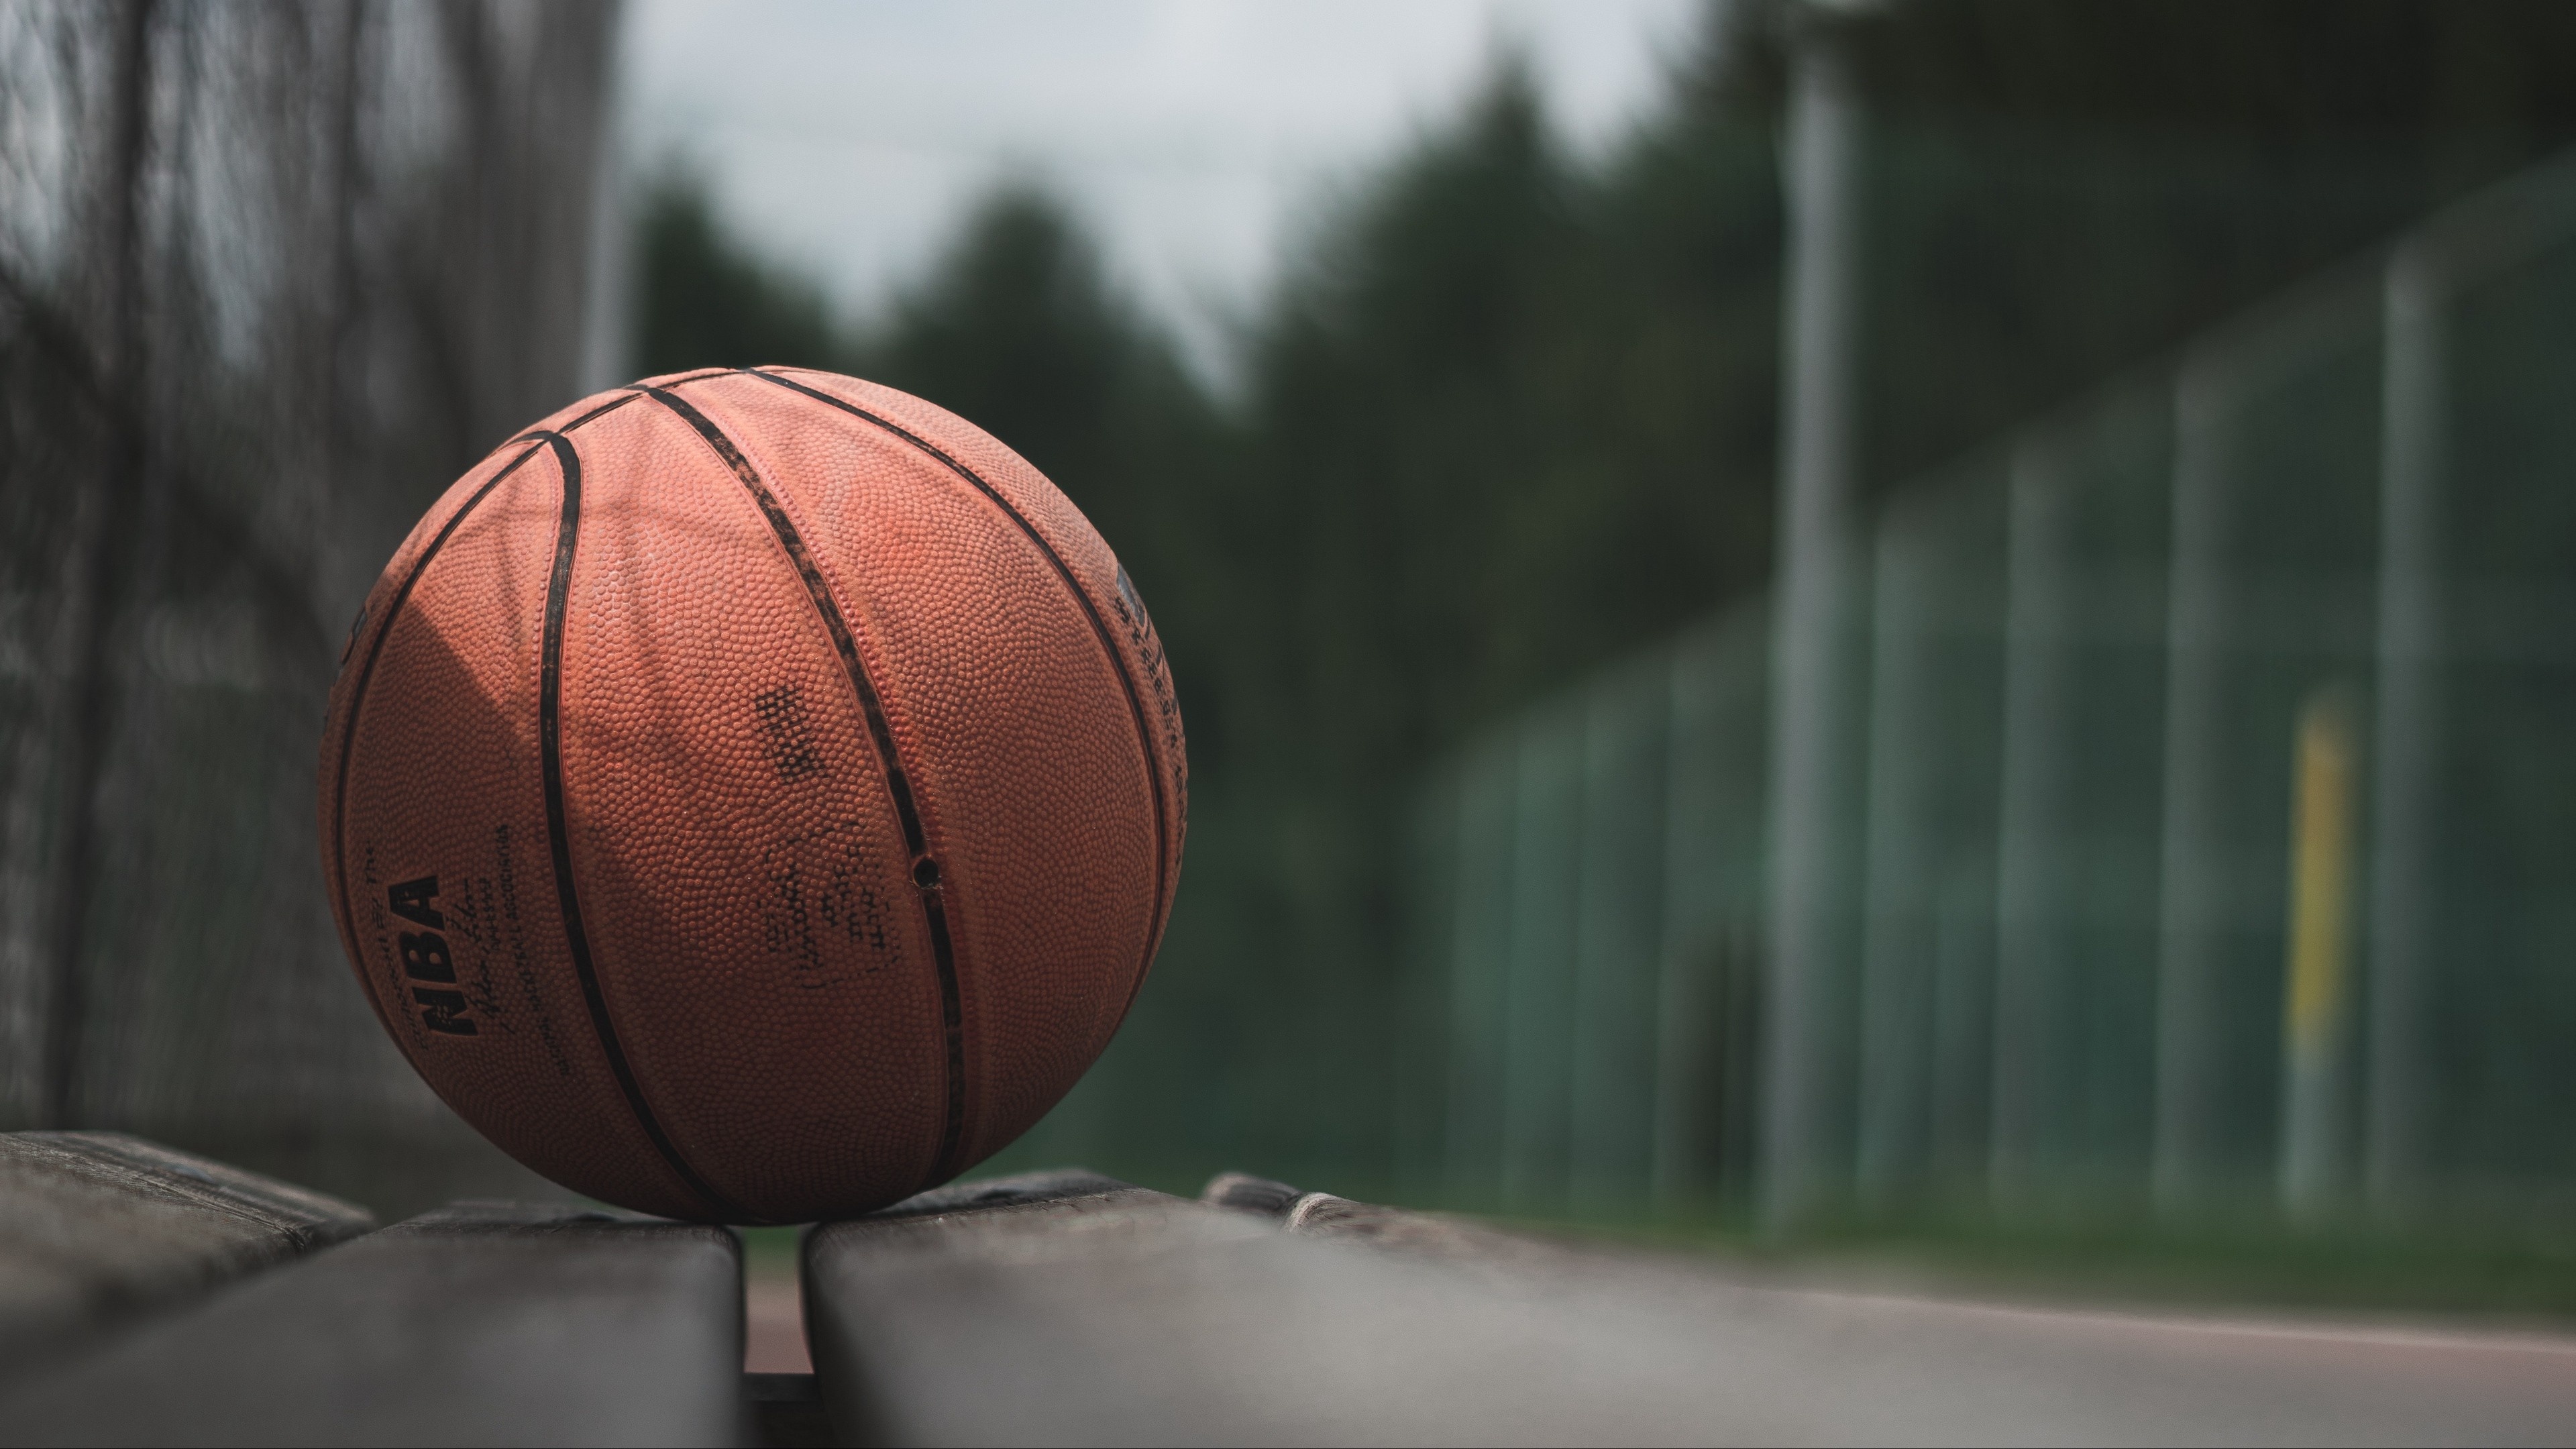 Streetball: Street basketball, A variation of basketball, typically played on outdoor courts. 3840x2160 4K Background.